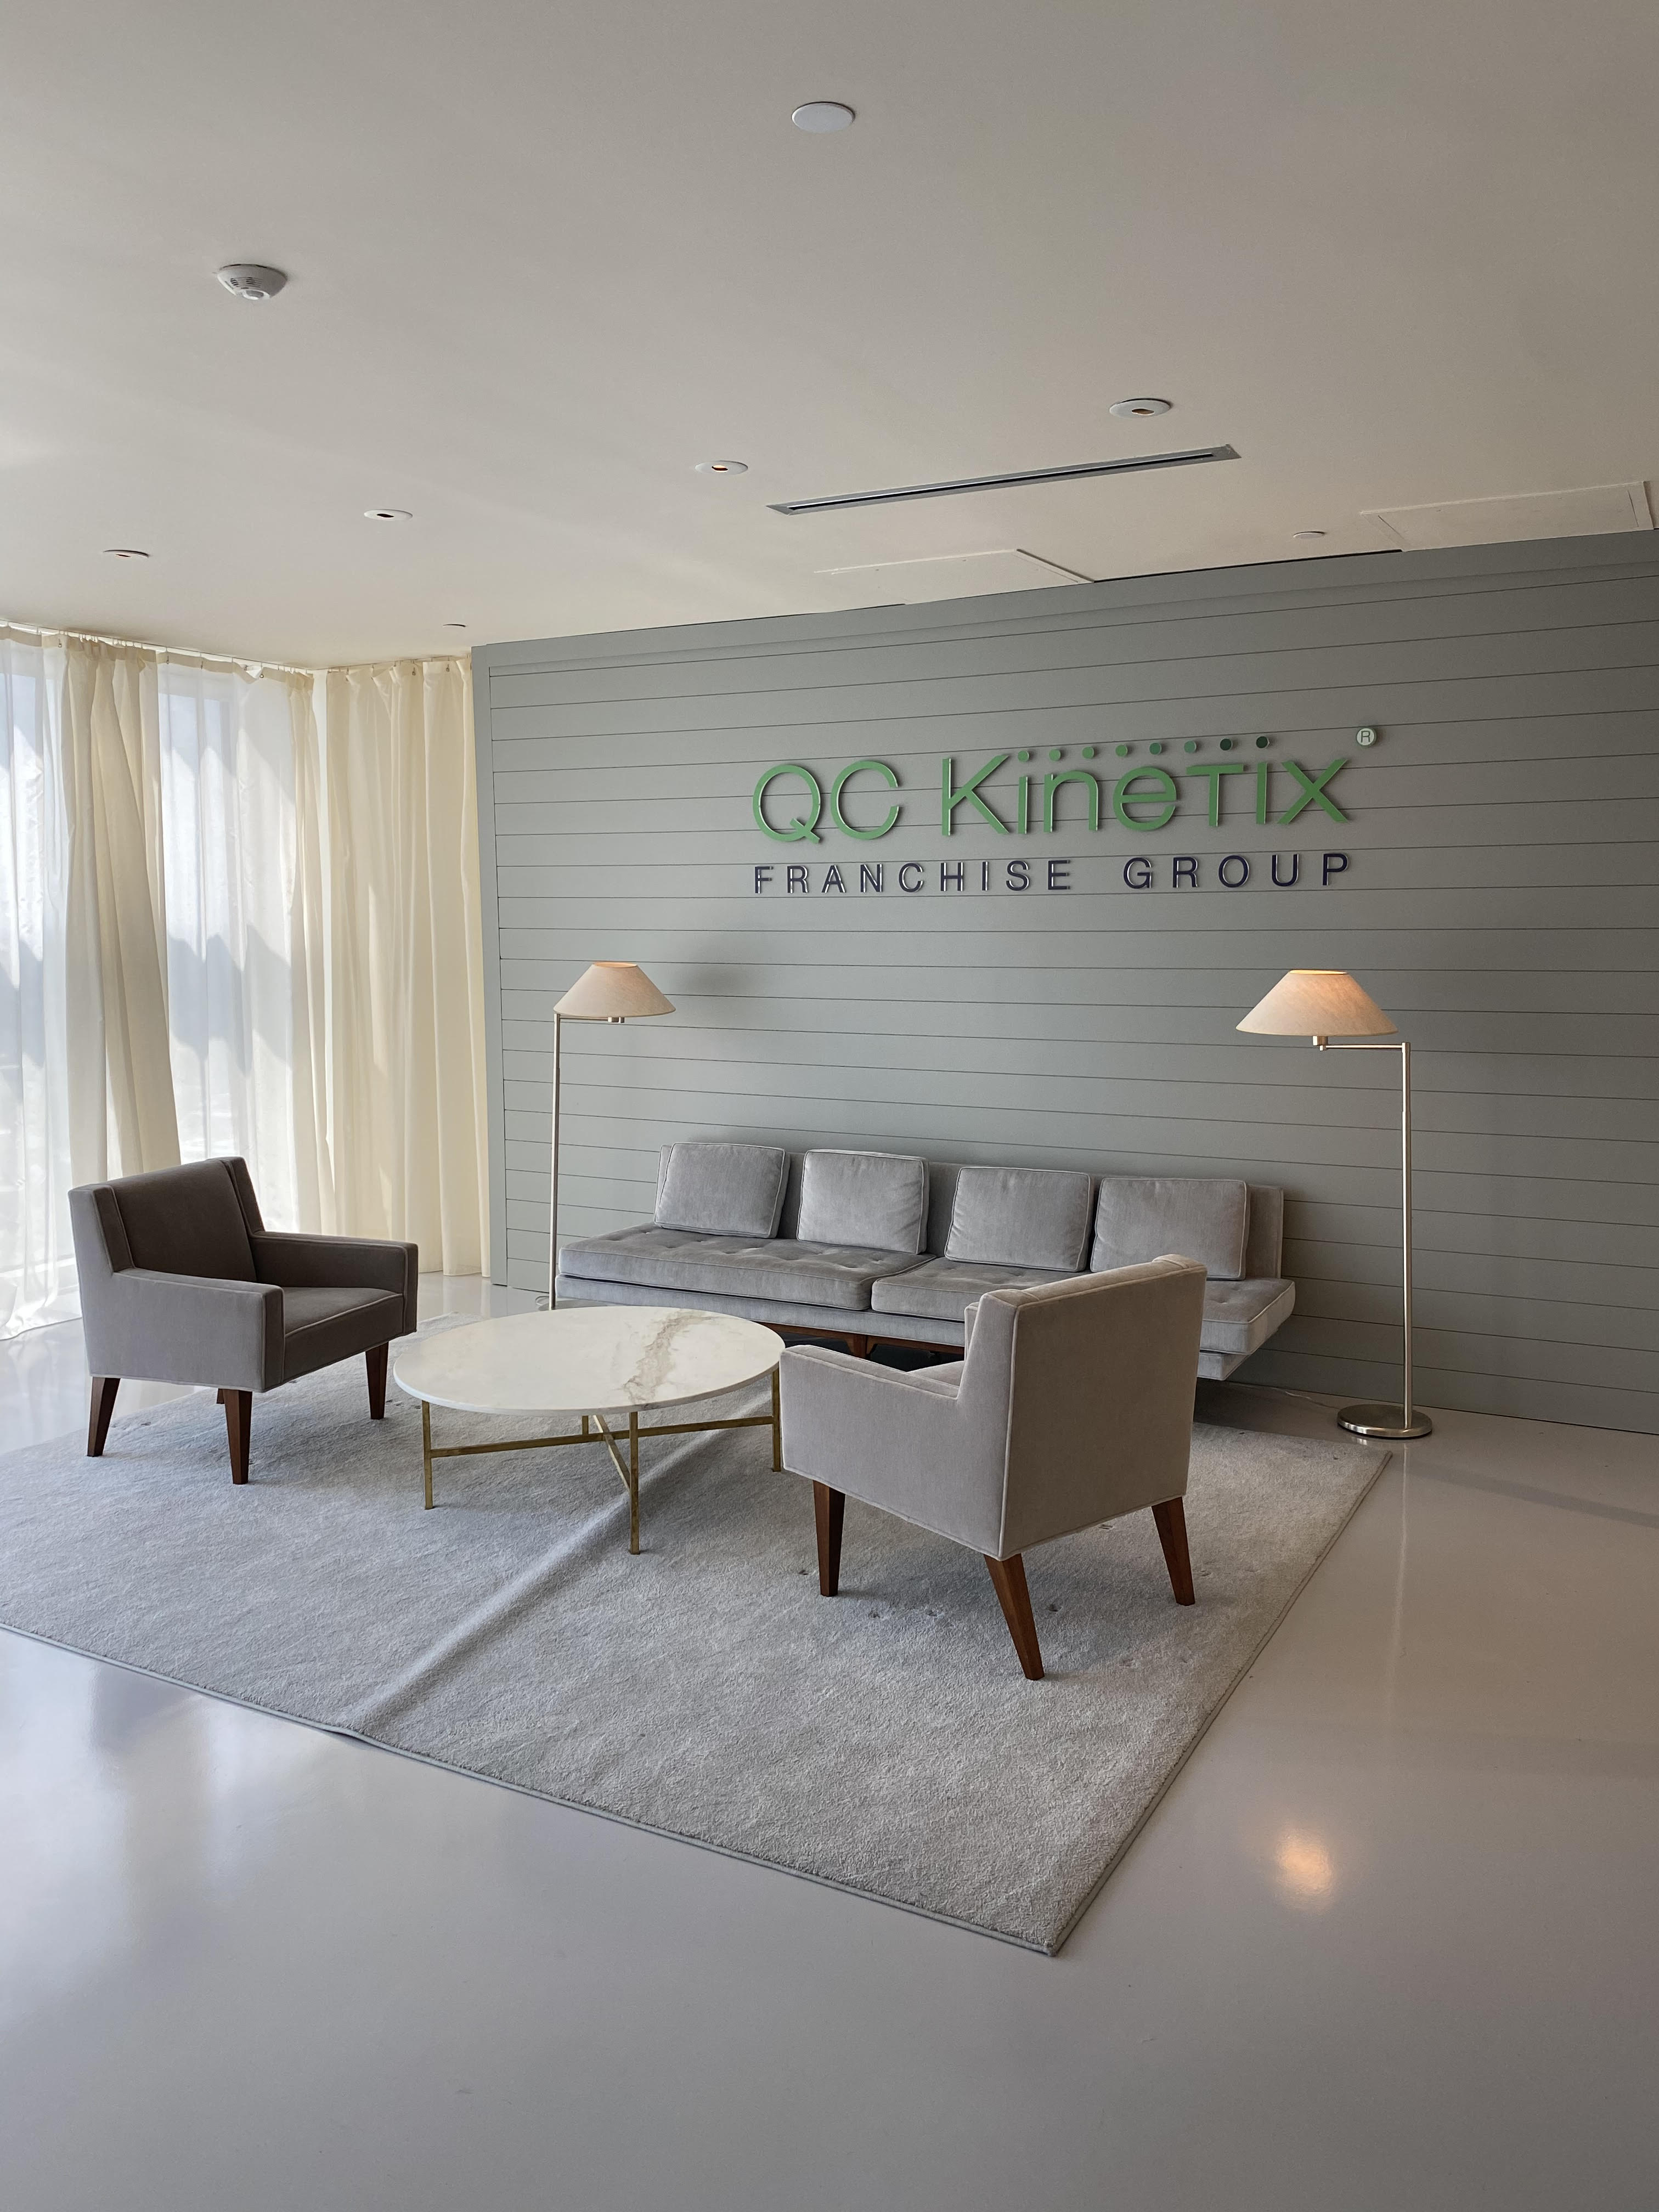 QC Kinetix, Tuesday, July 19, 2022, Press release picture